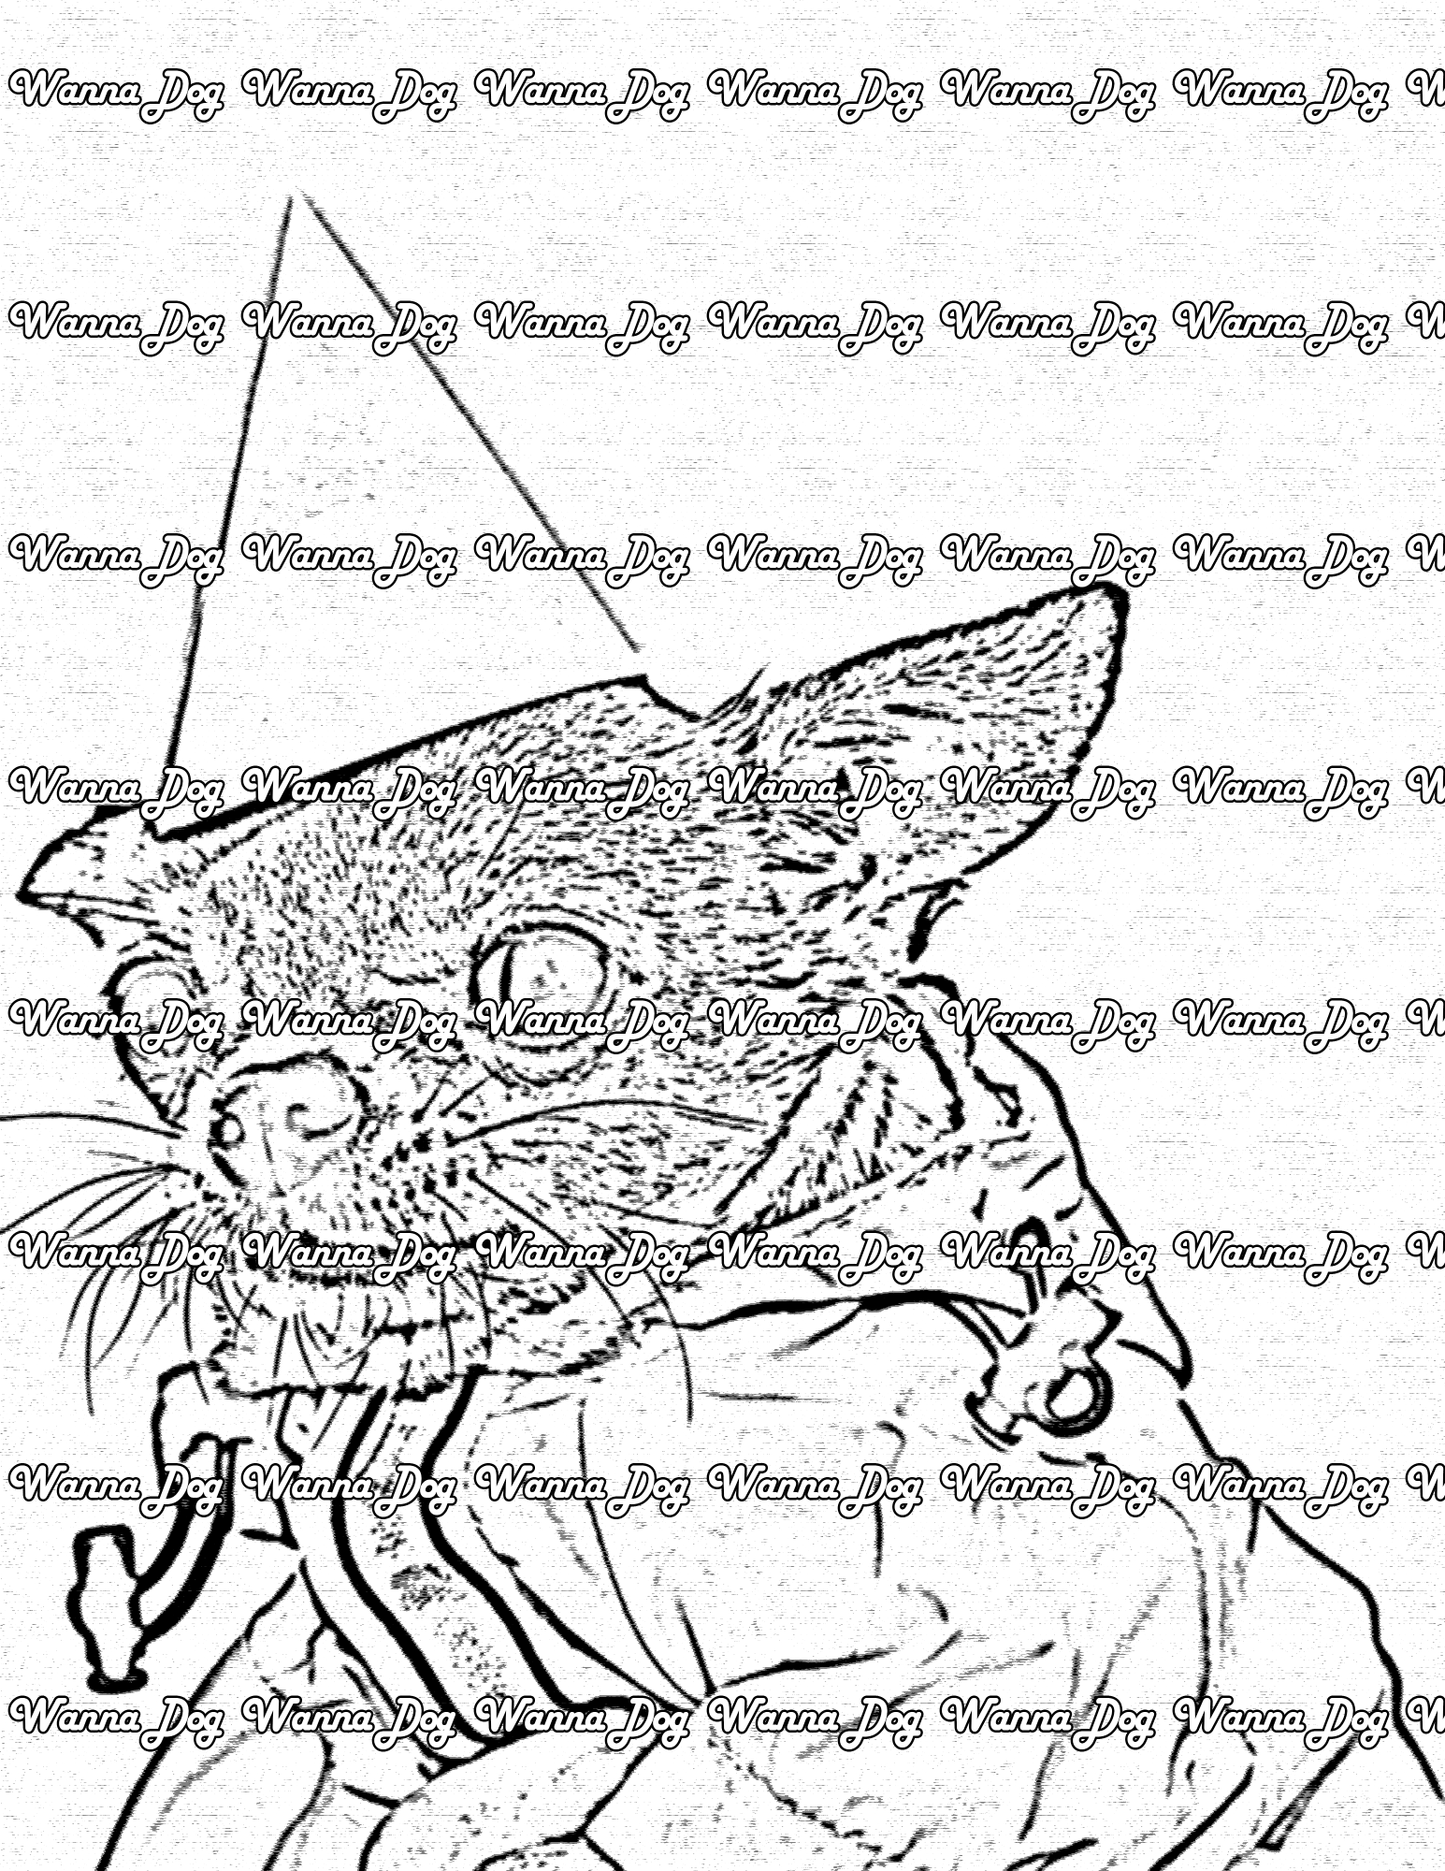 Chihuahua Coloring Page of a Chihuahua wearing a hat and jacket